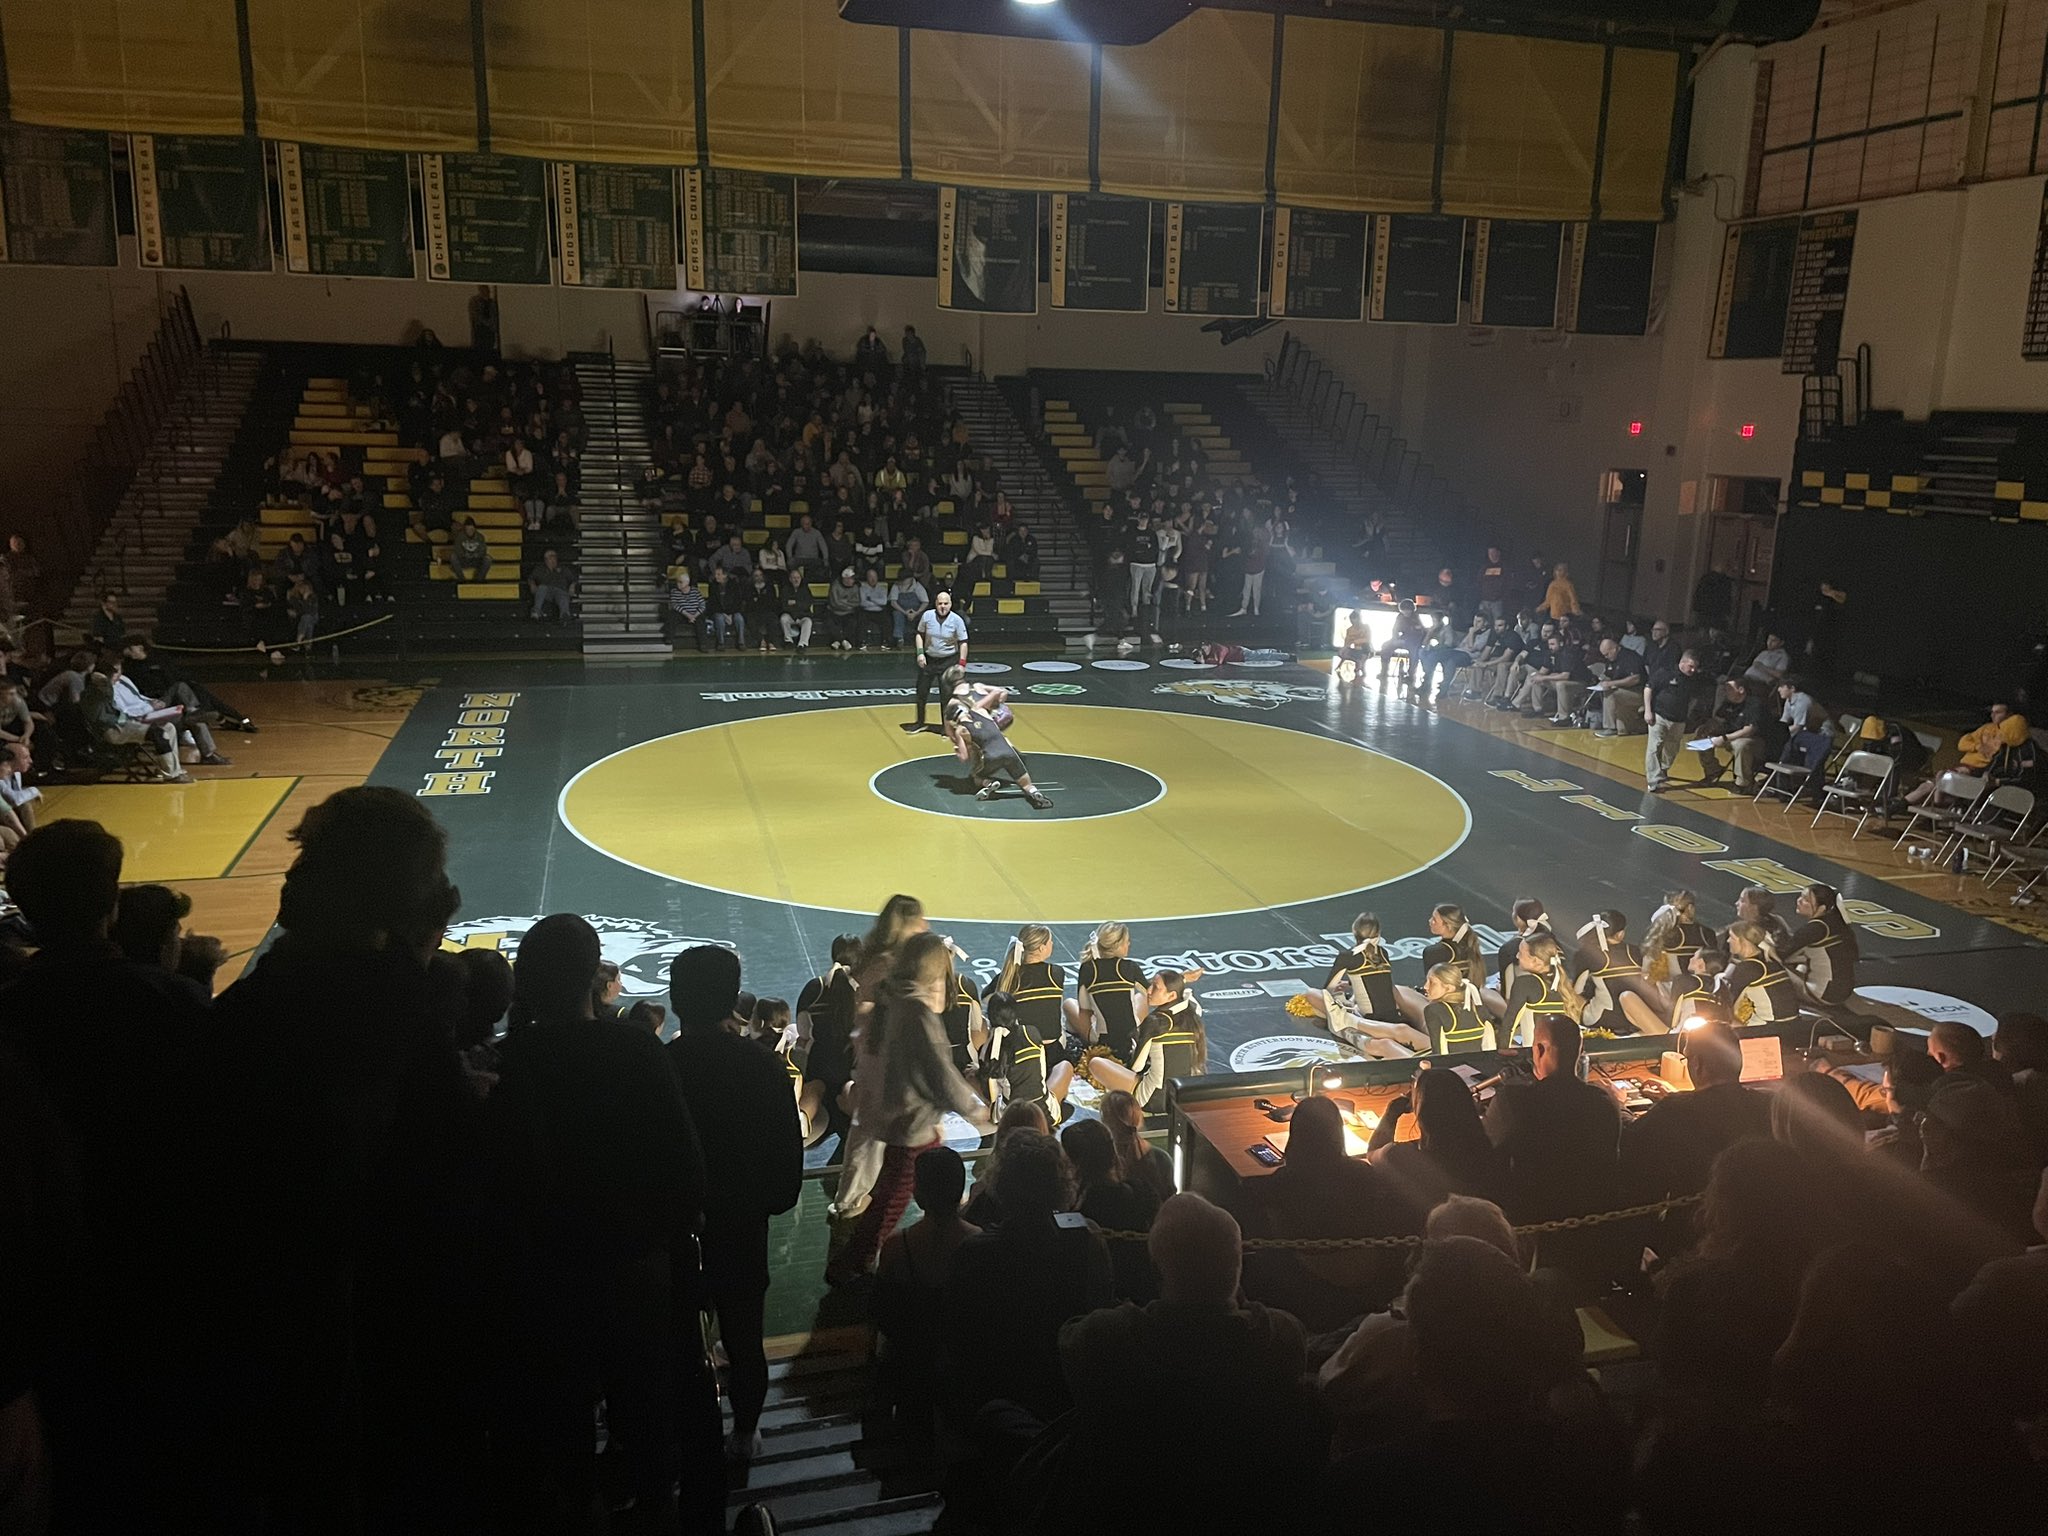 Dave Bell Comes Out Victorious in Debut against Voorhees, 43-28